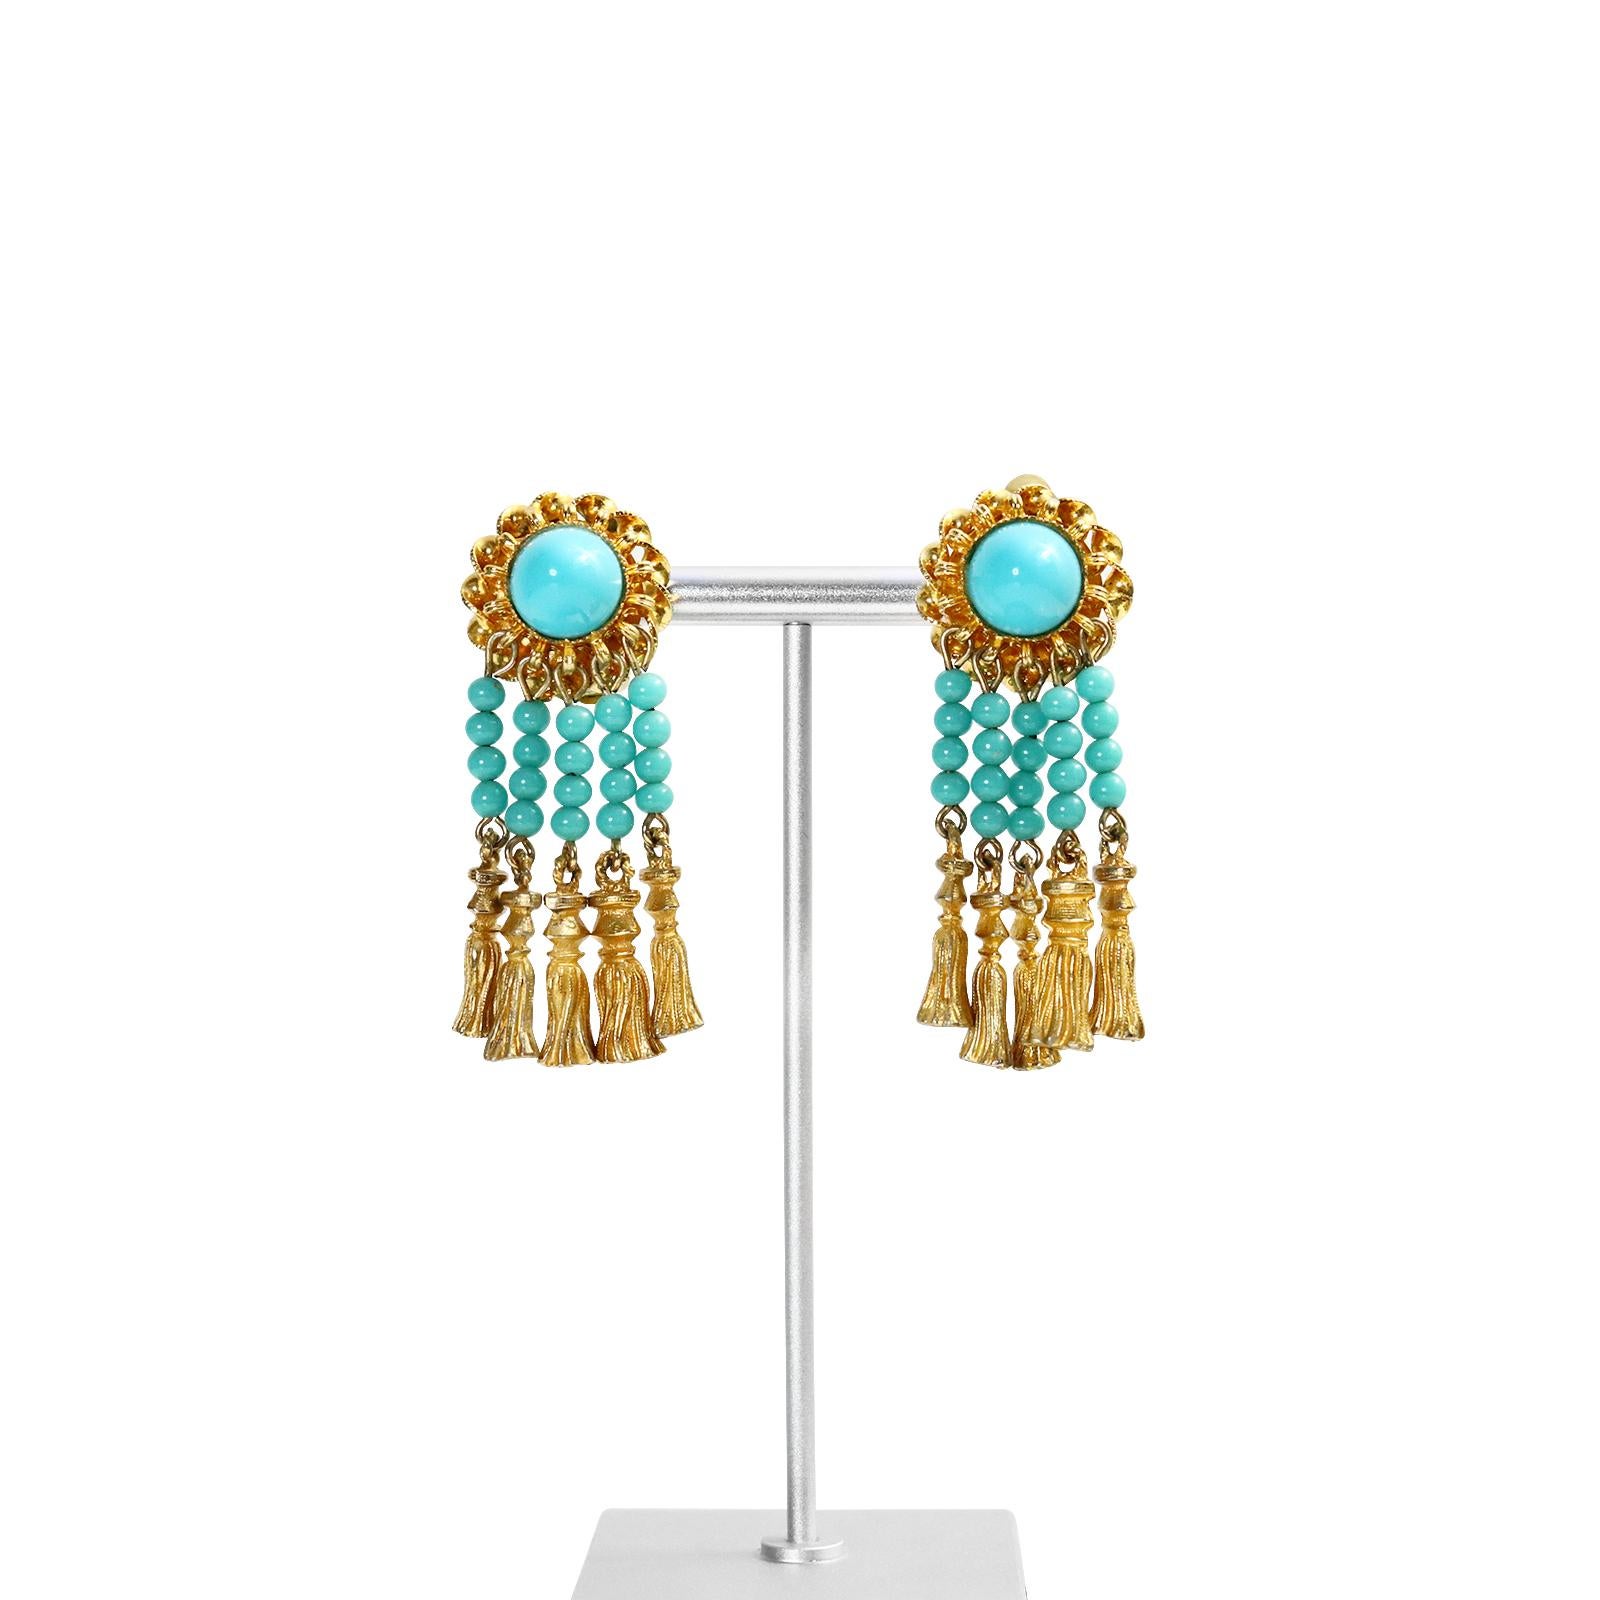 Vintage deLillo Faux Turquoise and Gold Tone Dangling Earrings Circa 1970s For Sale 1